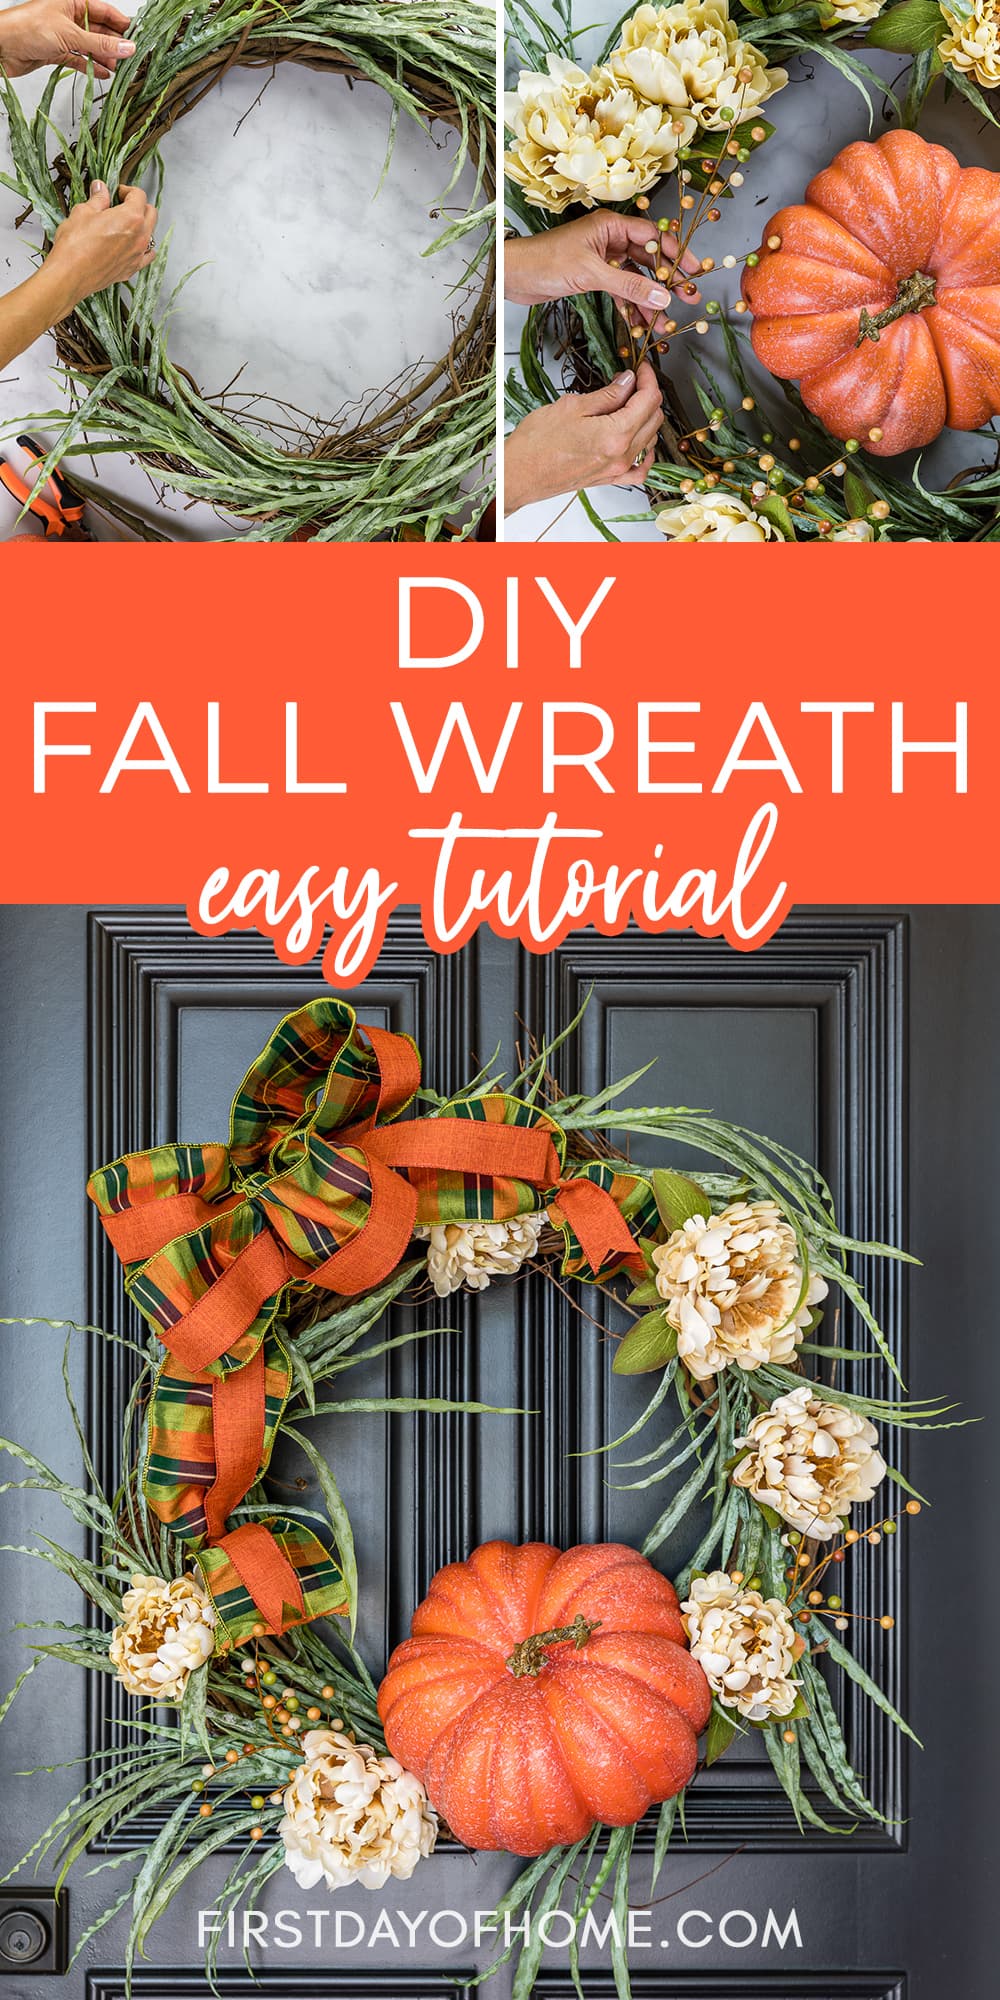 Collage showing steps for making a DIY fall wreath. Text overlay reads "DIY Fall Wreath Easy Tutorial"